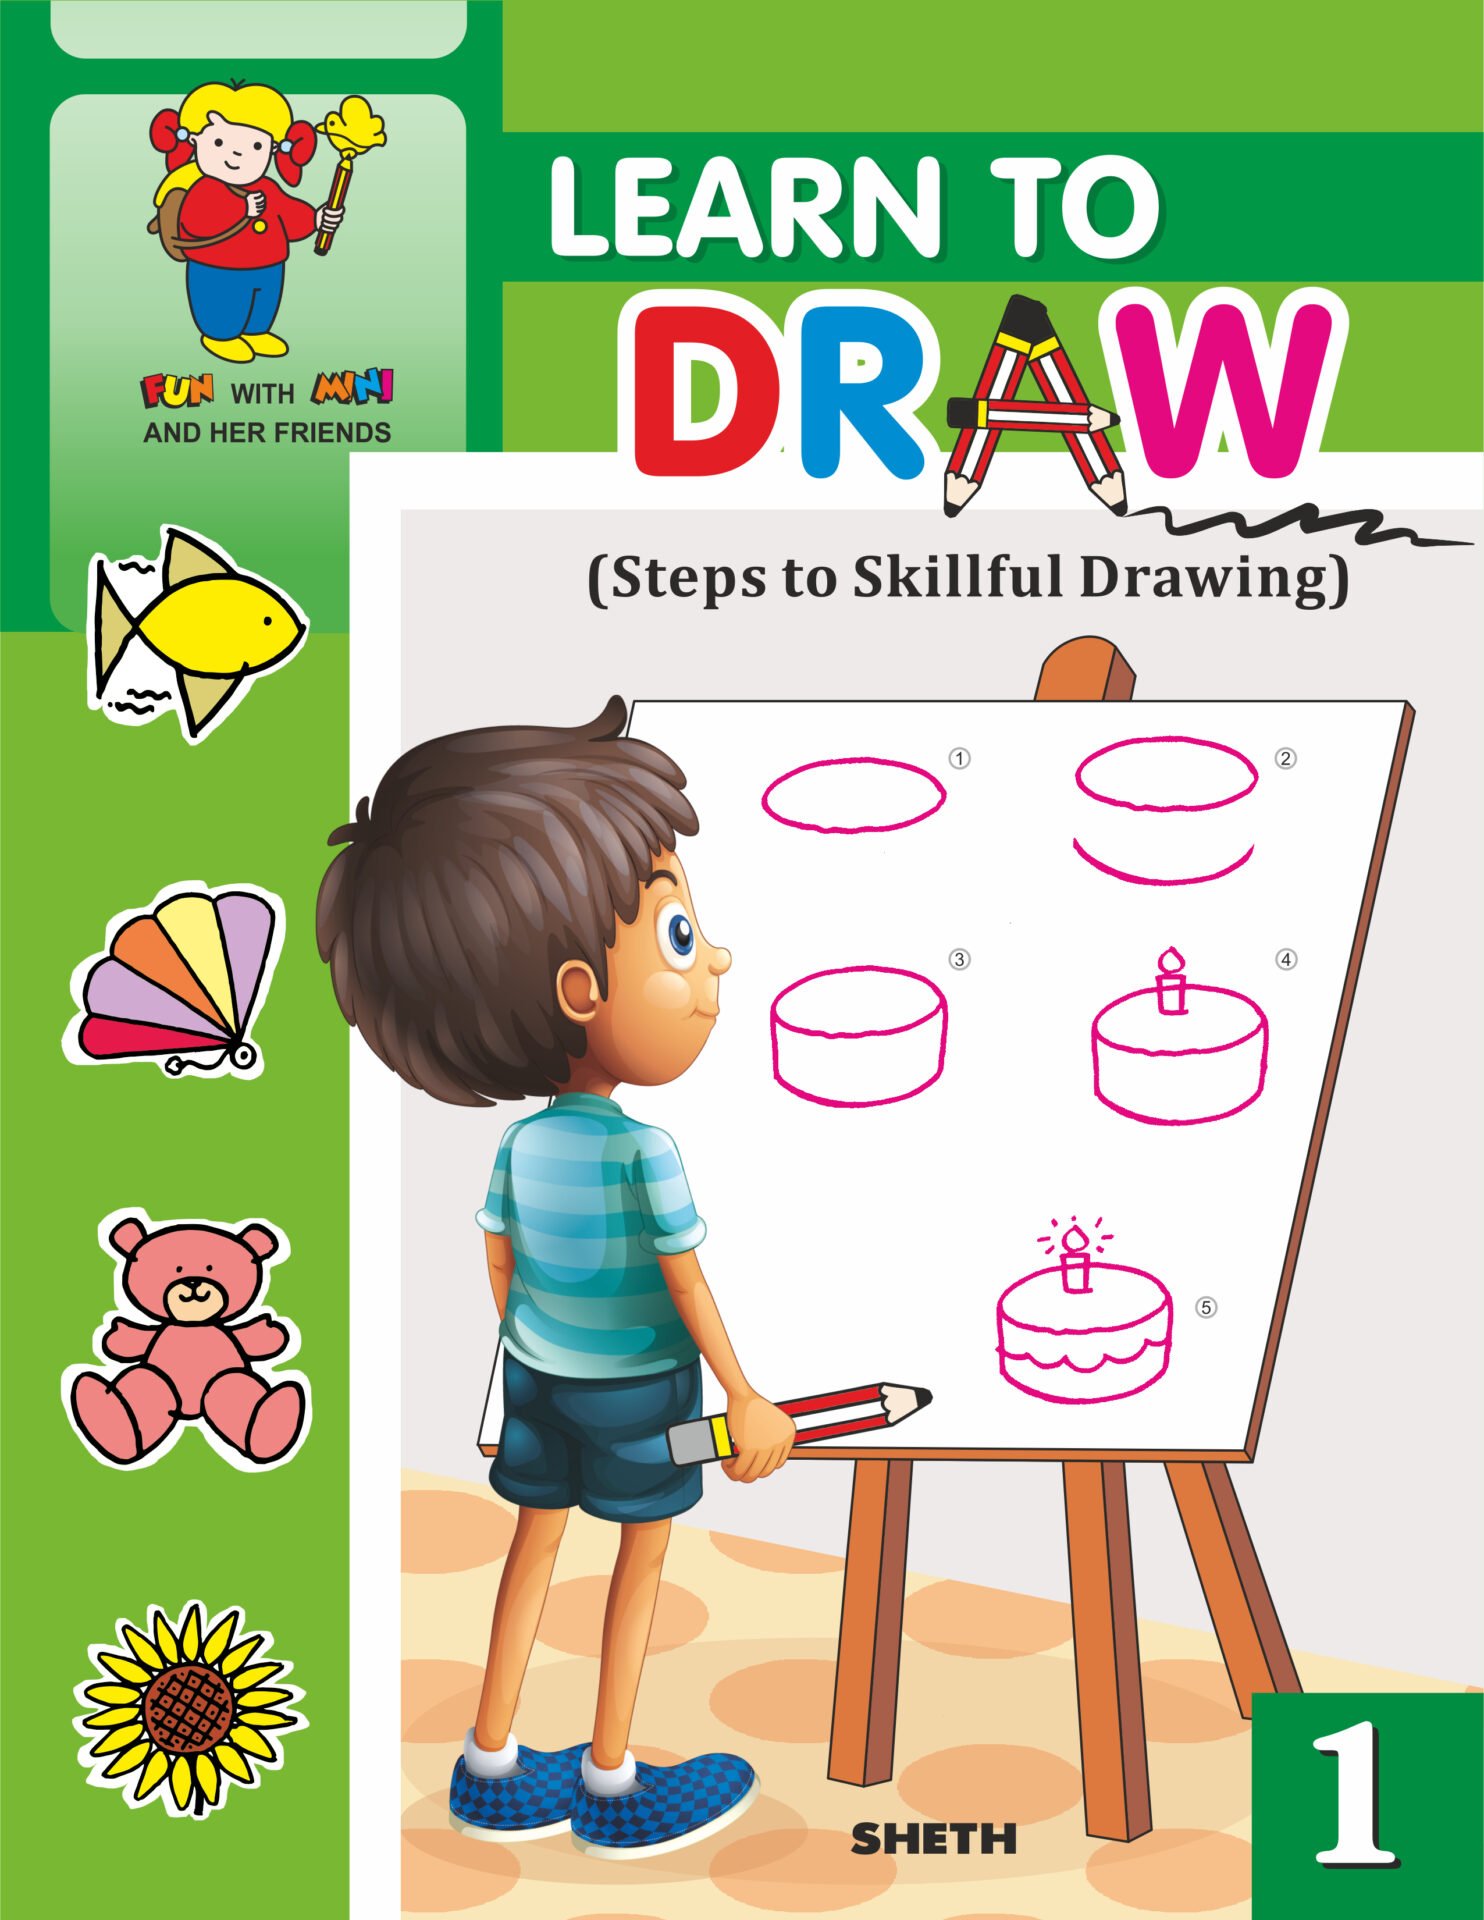 How to Draw A Centipede - Learn to Draw in 6 EASY STEPS!